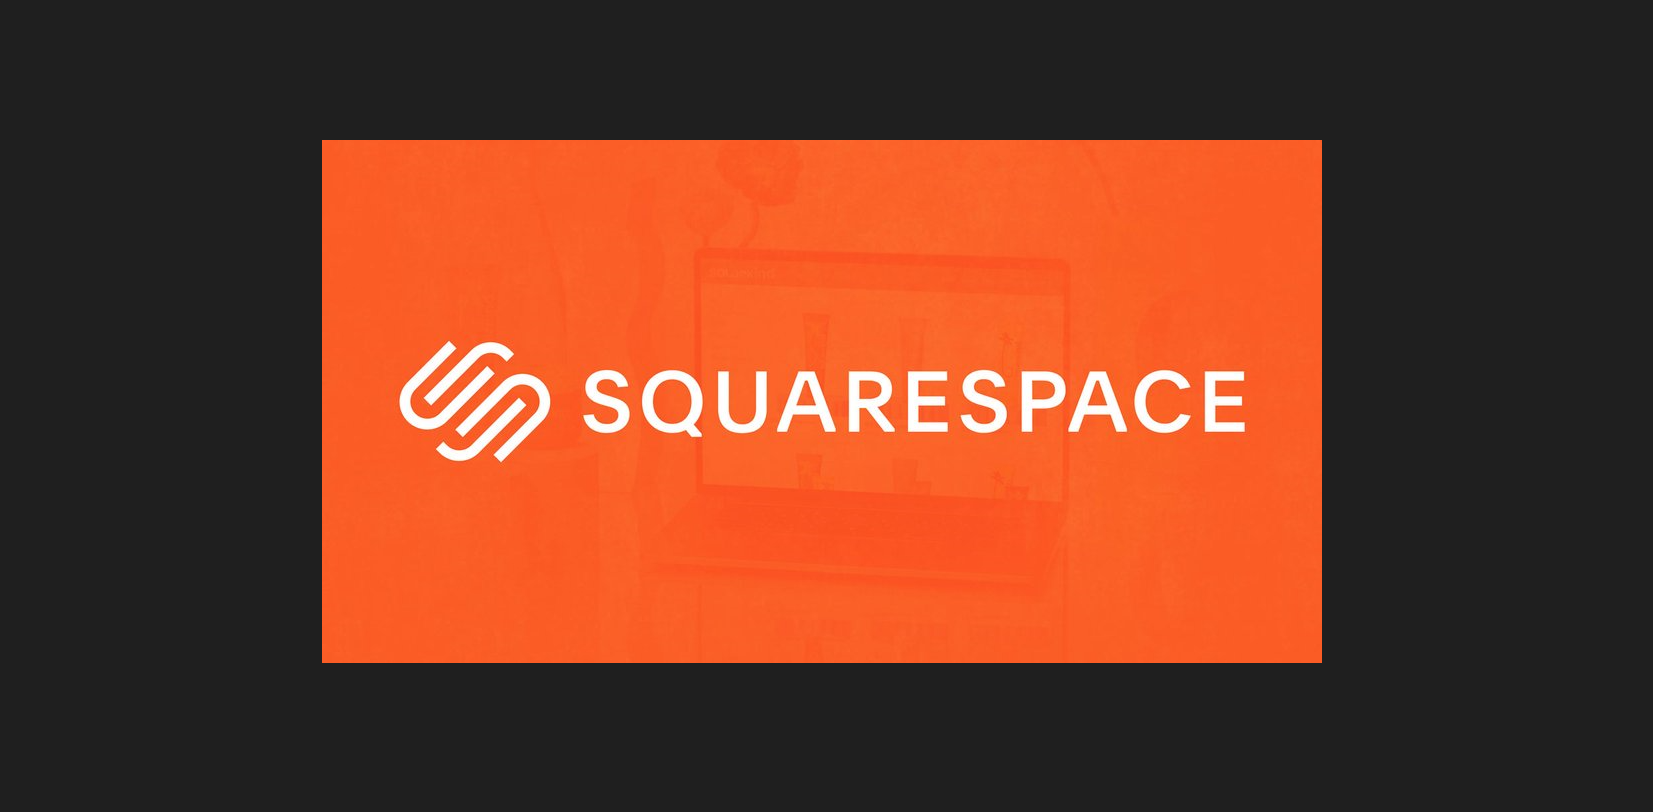 Squarespace Small Business